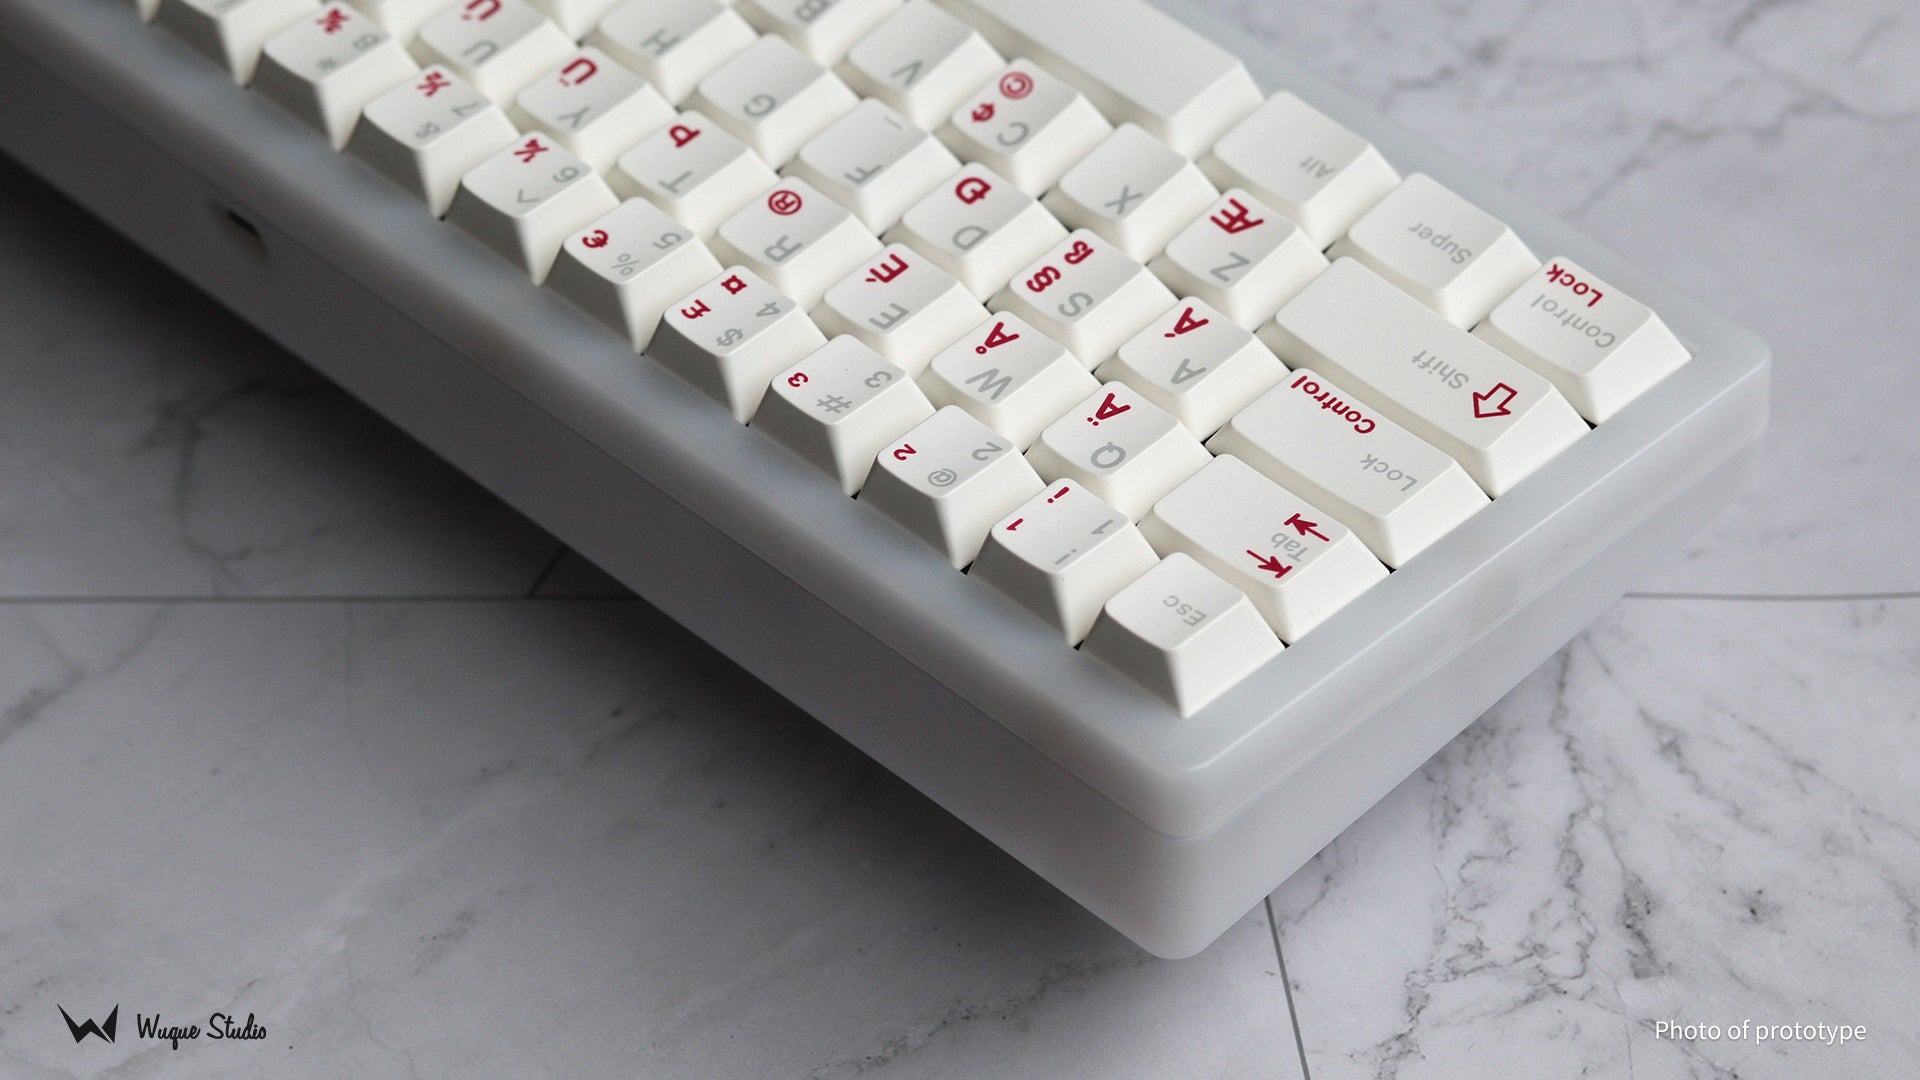 In stock] WS GR IRISH Keycap-Shipped from US Warehouse – Wuque Studio